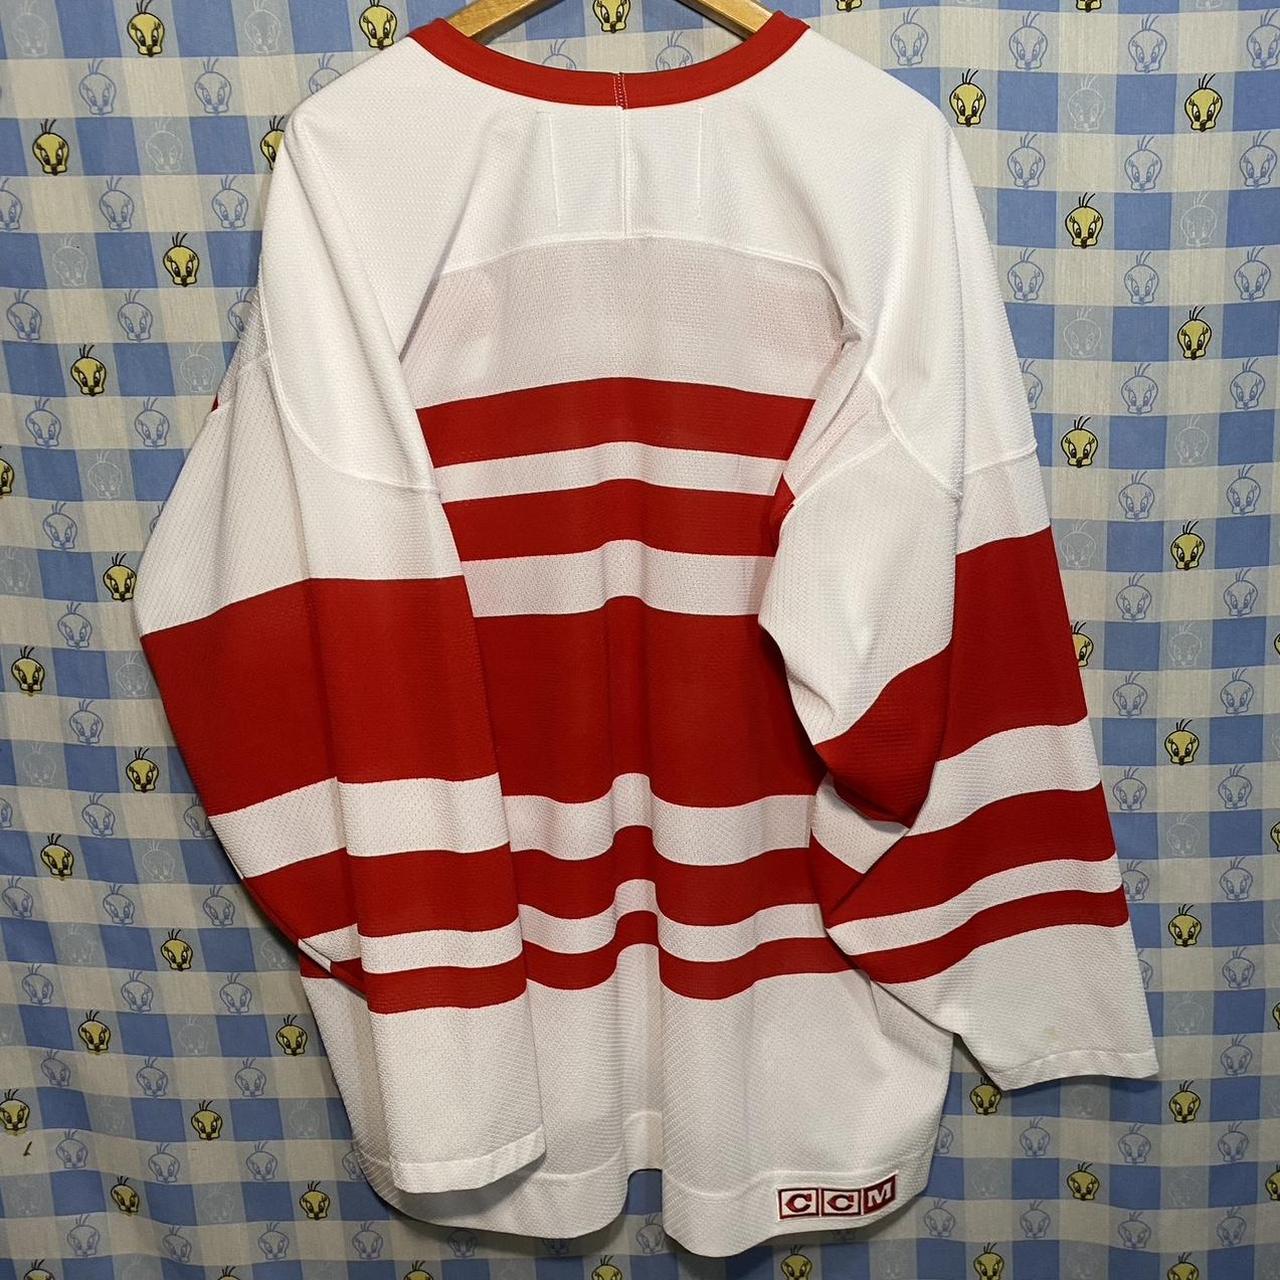 Canada Goose Men's Red and White Top (2)